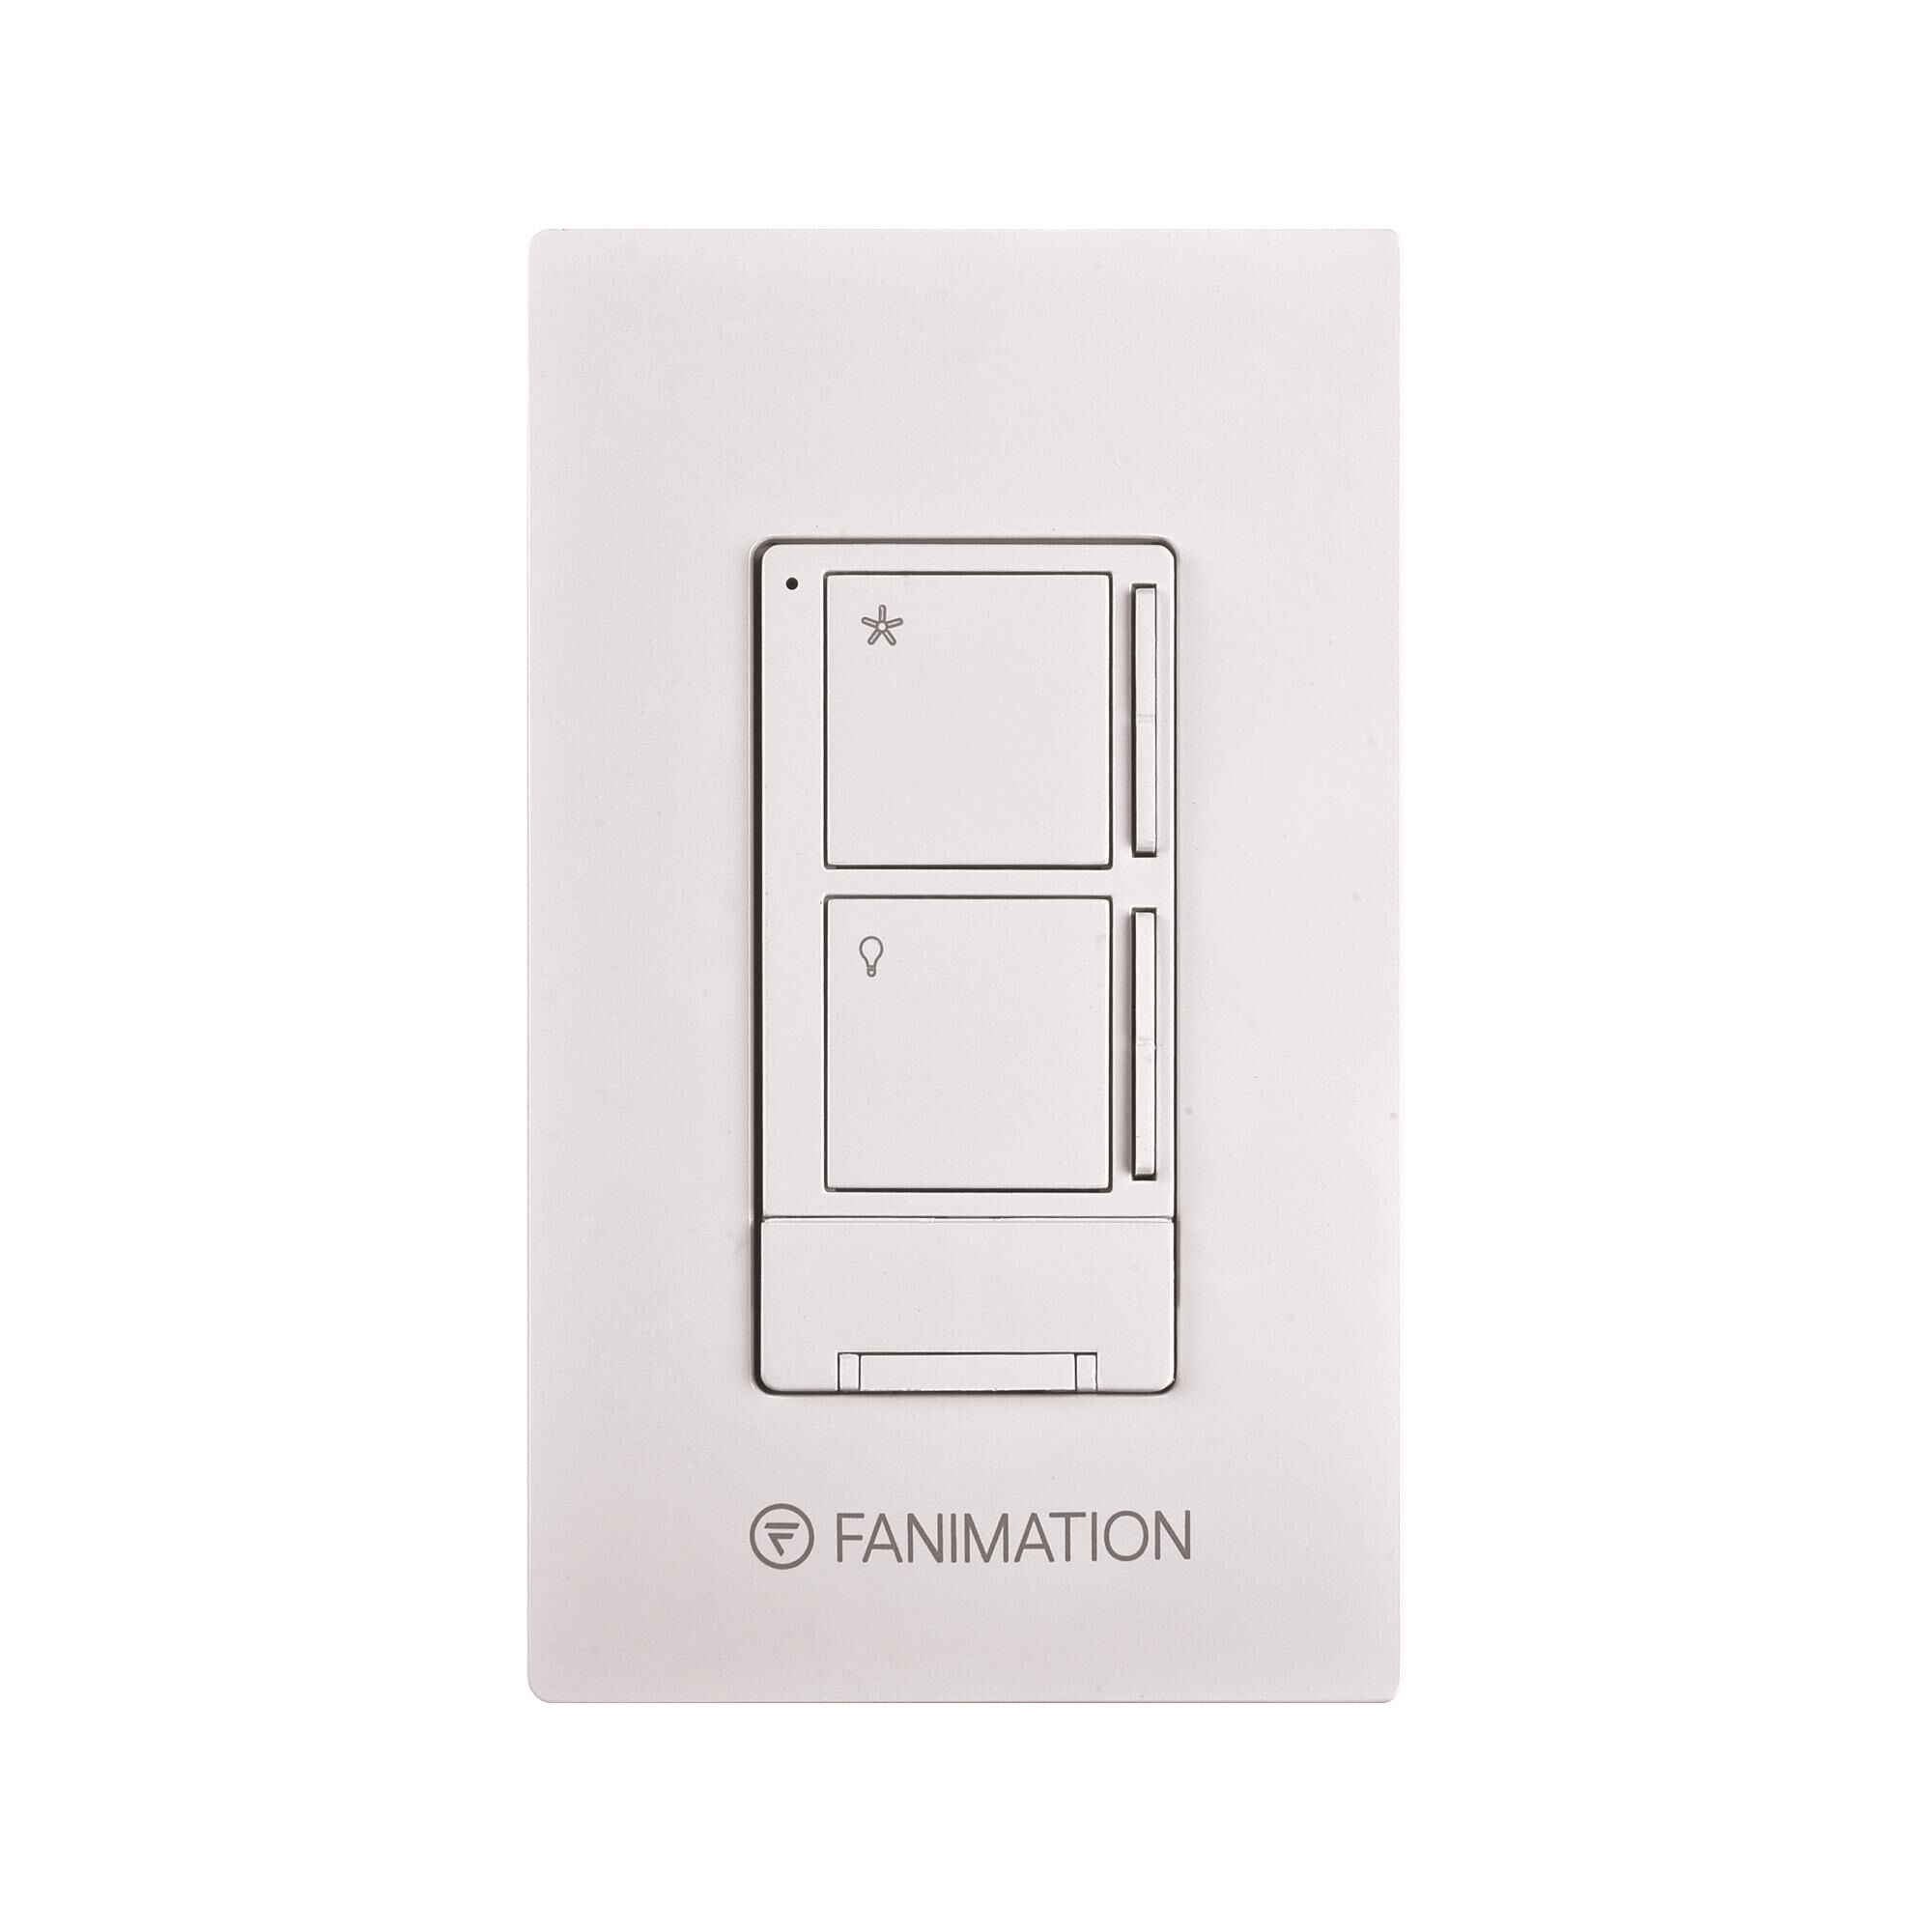 Photos - Fan imation  Control - WR501WH WR501WH